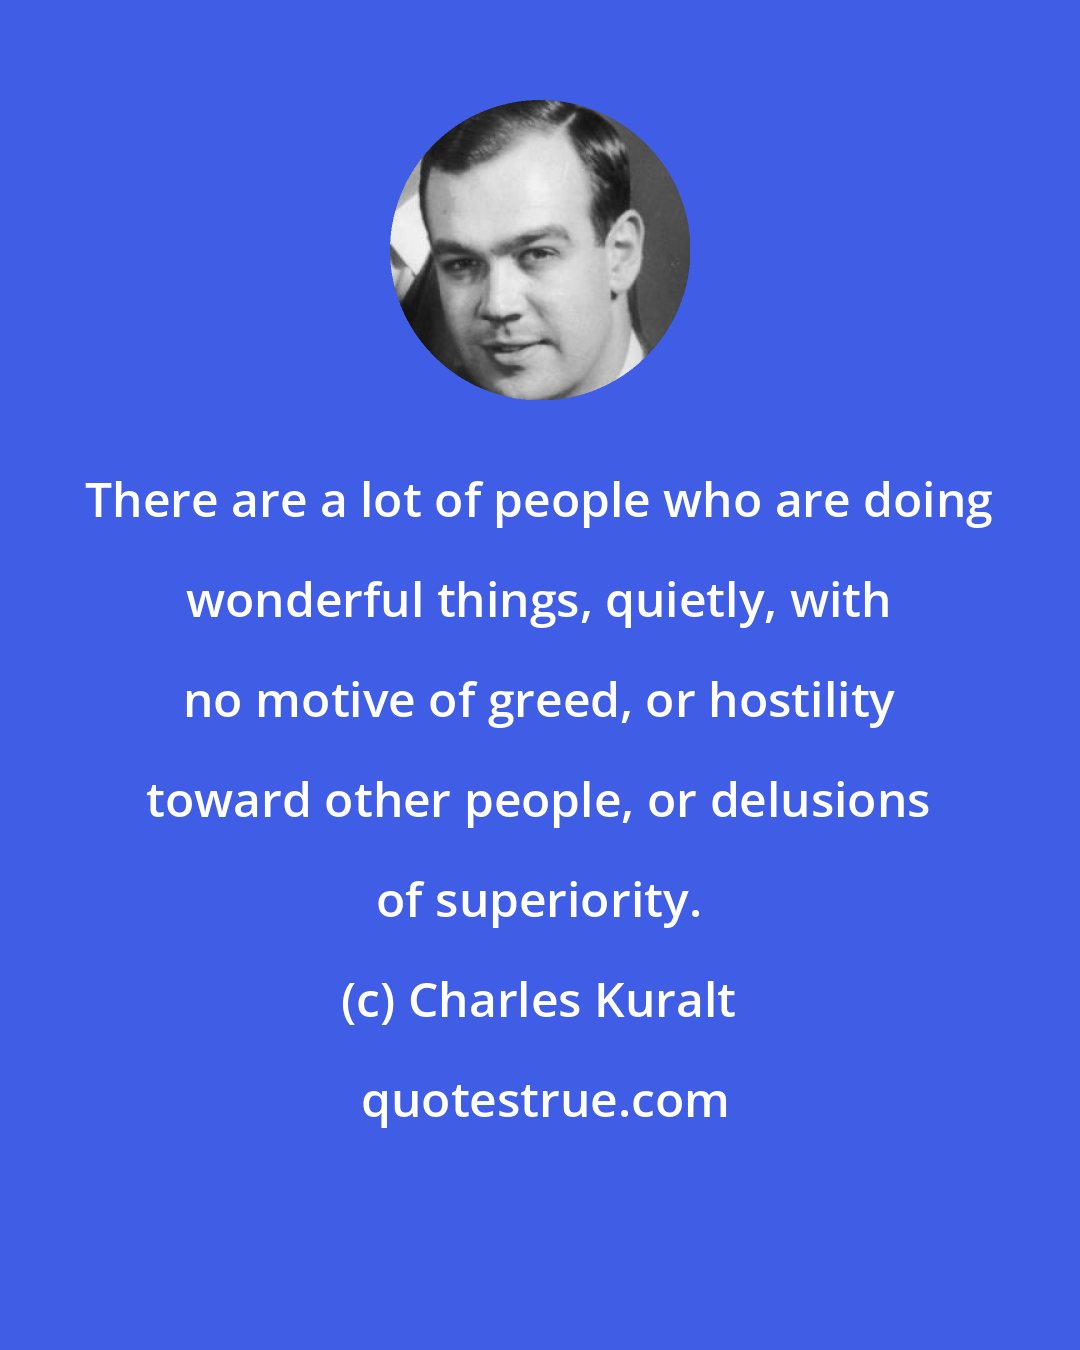 Charles Kuralt: There are a lot of people who are doing wonderful things, quietly, with no motive of greed, or hostility toward other people, or delusions of superiority.